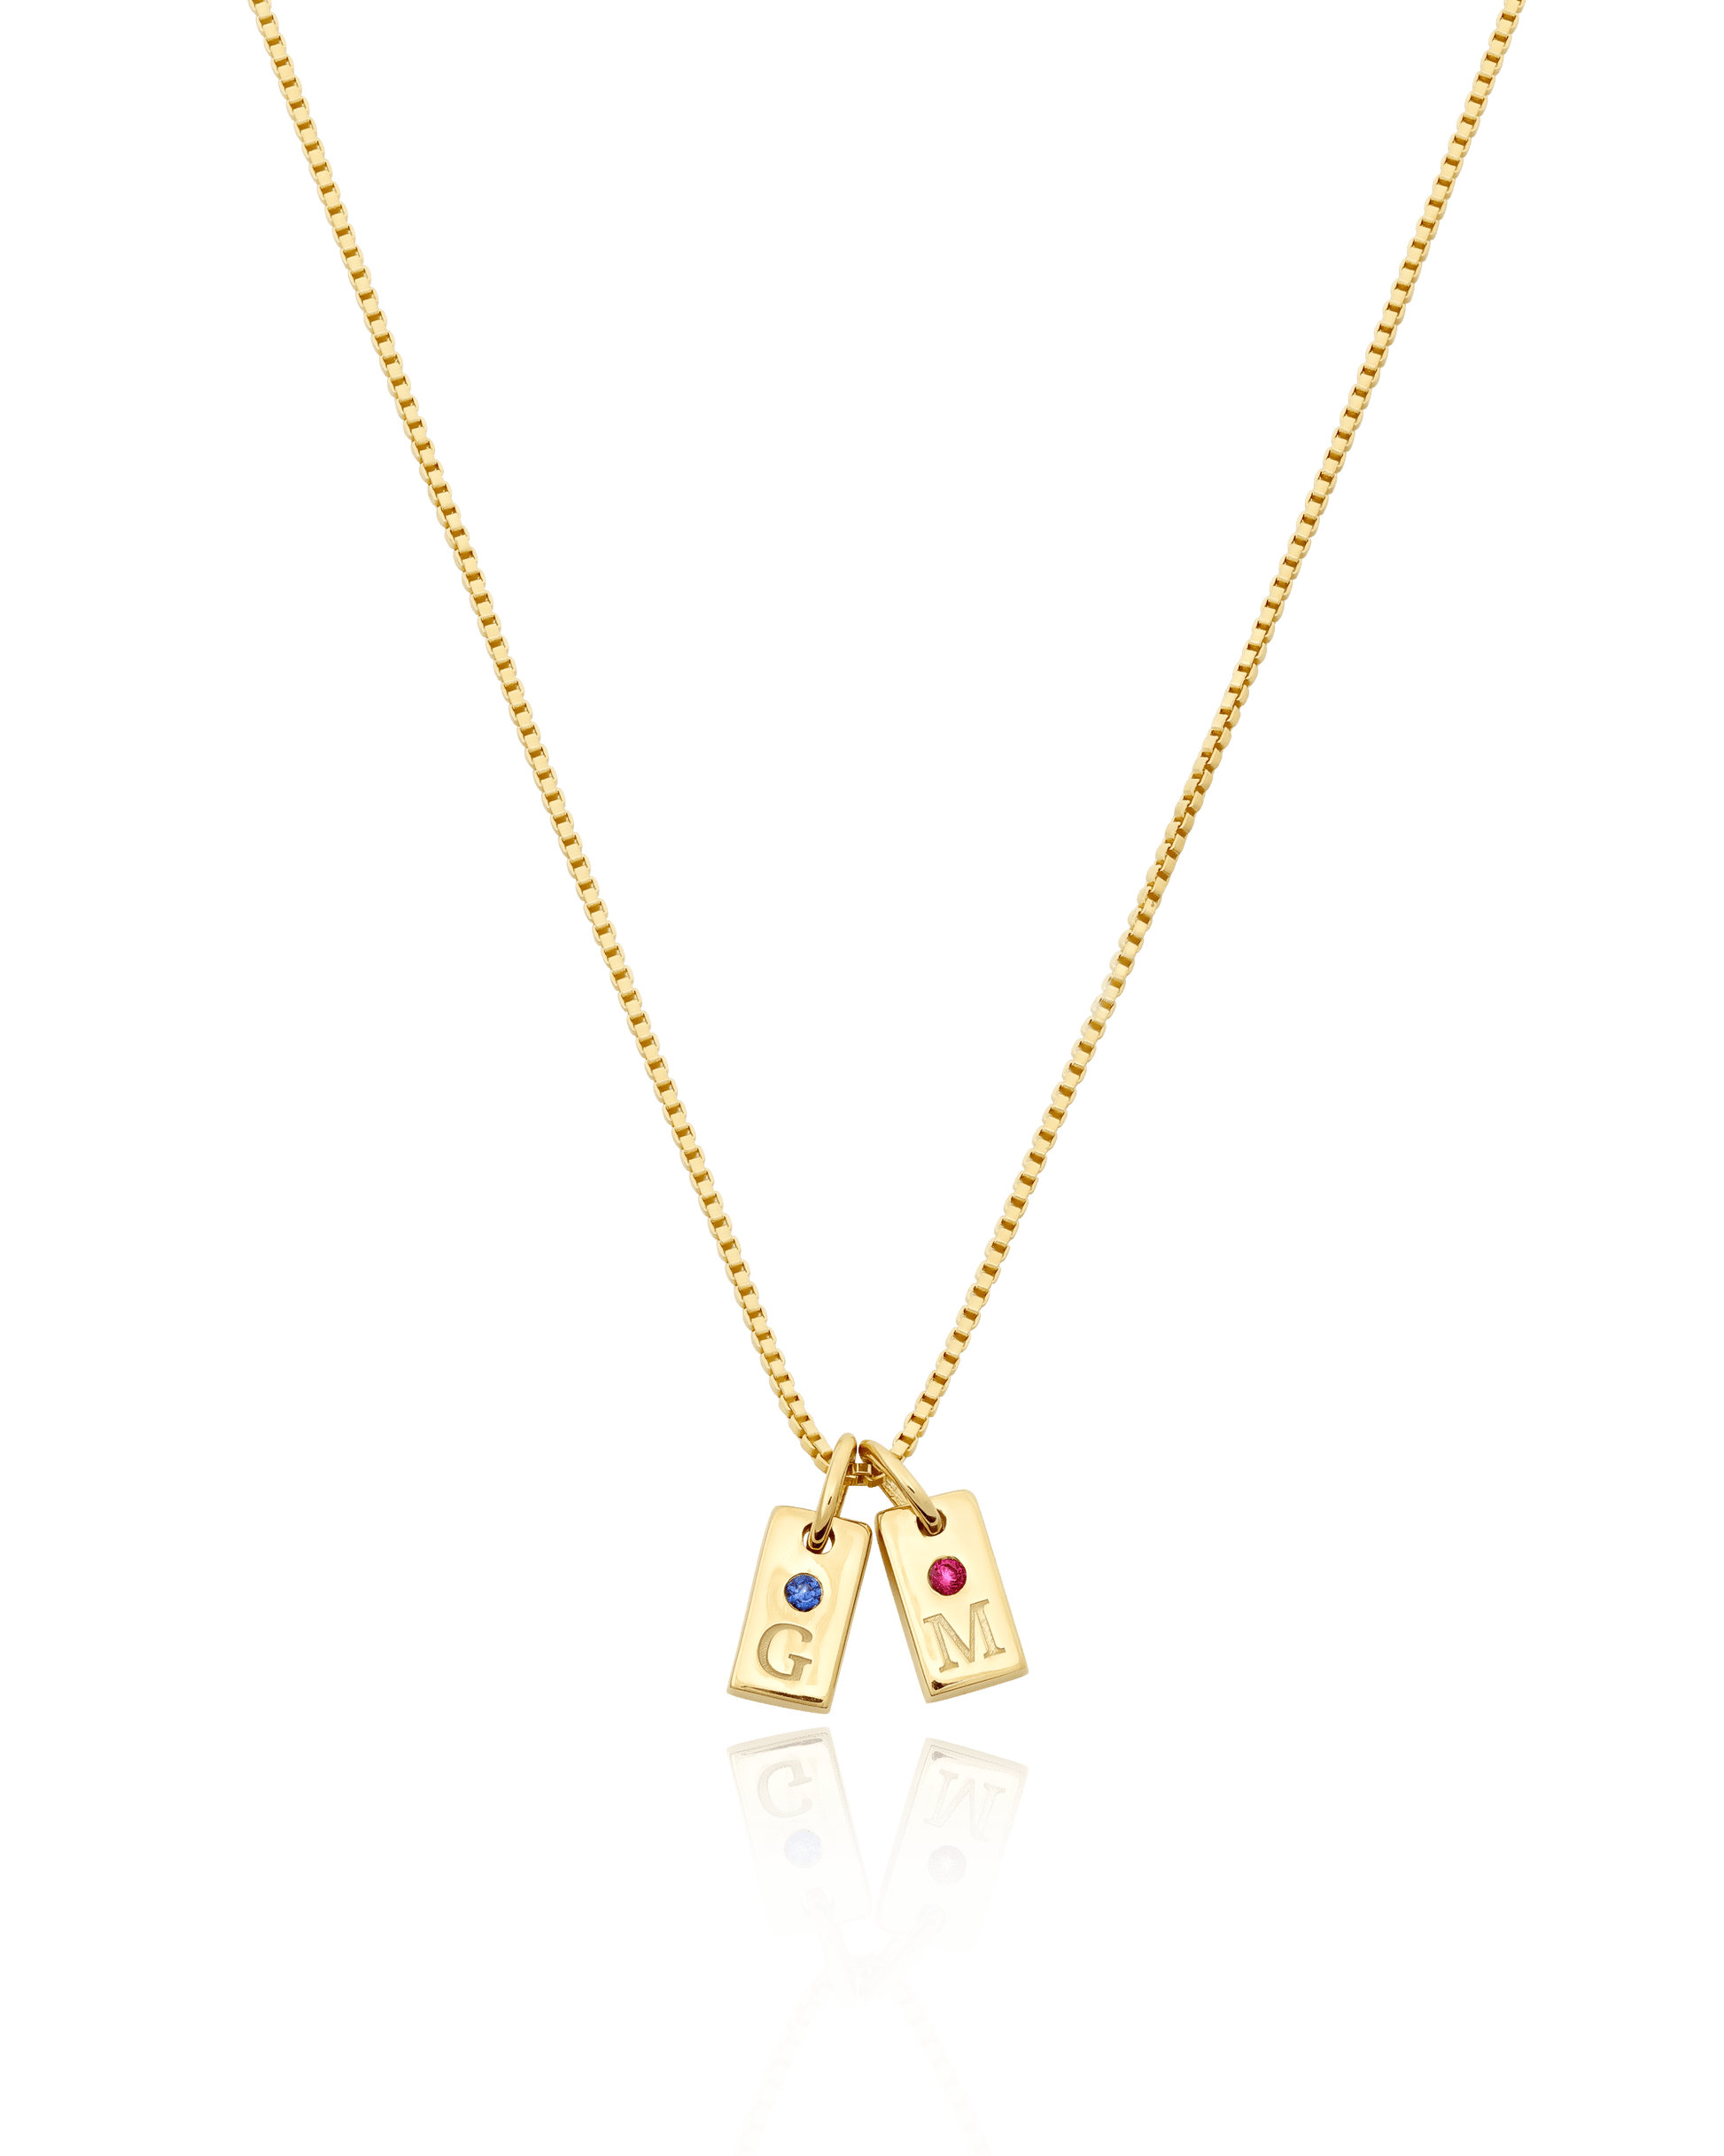 Initial Mini Dogtag Necklace w/Birthstones - 18K Gold Vermeil Necklaces magal-dev 1 Tag 16" 